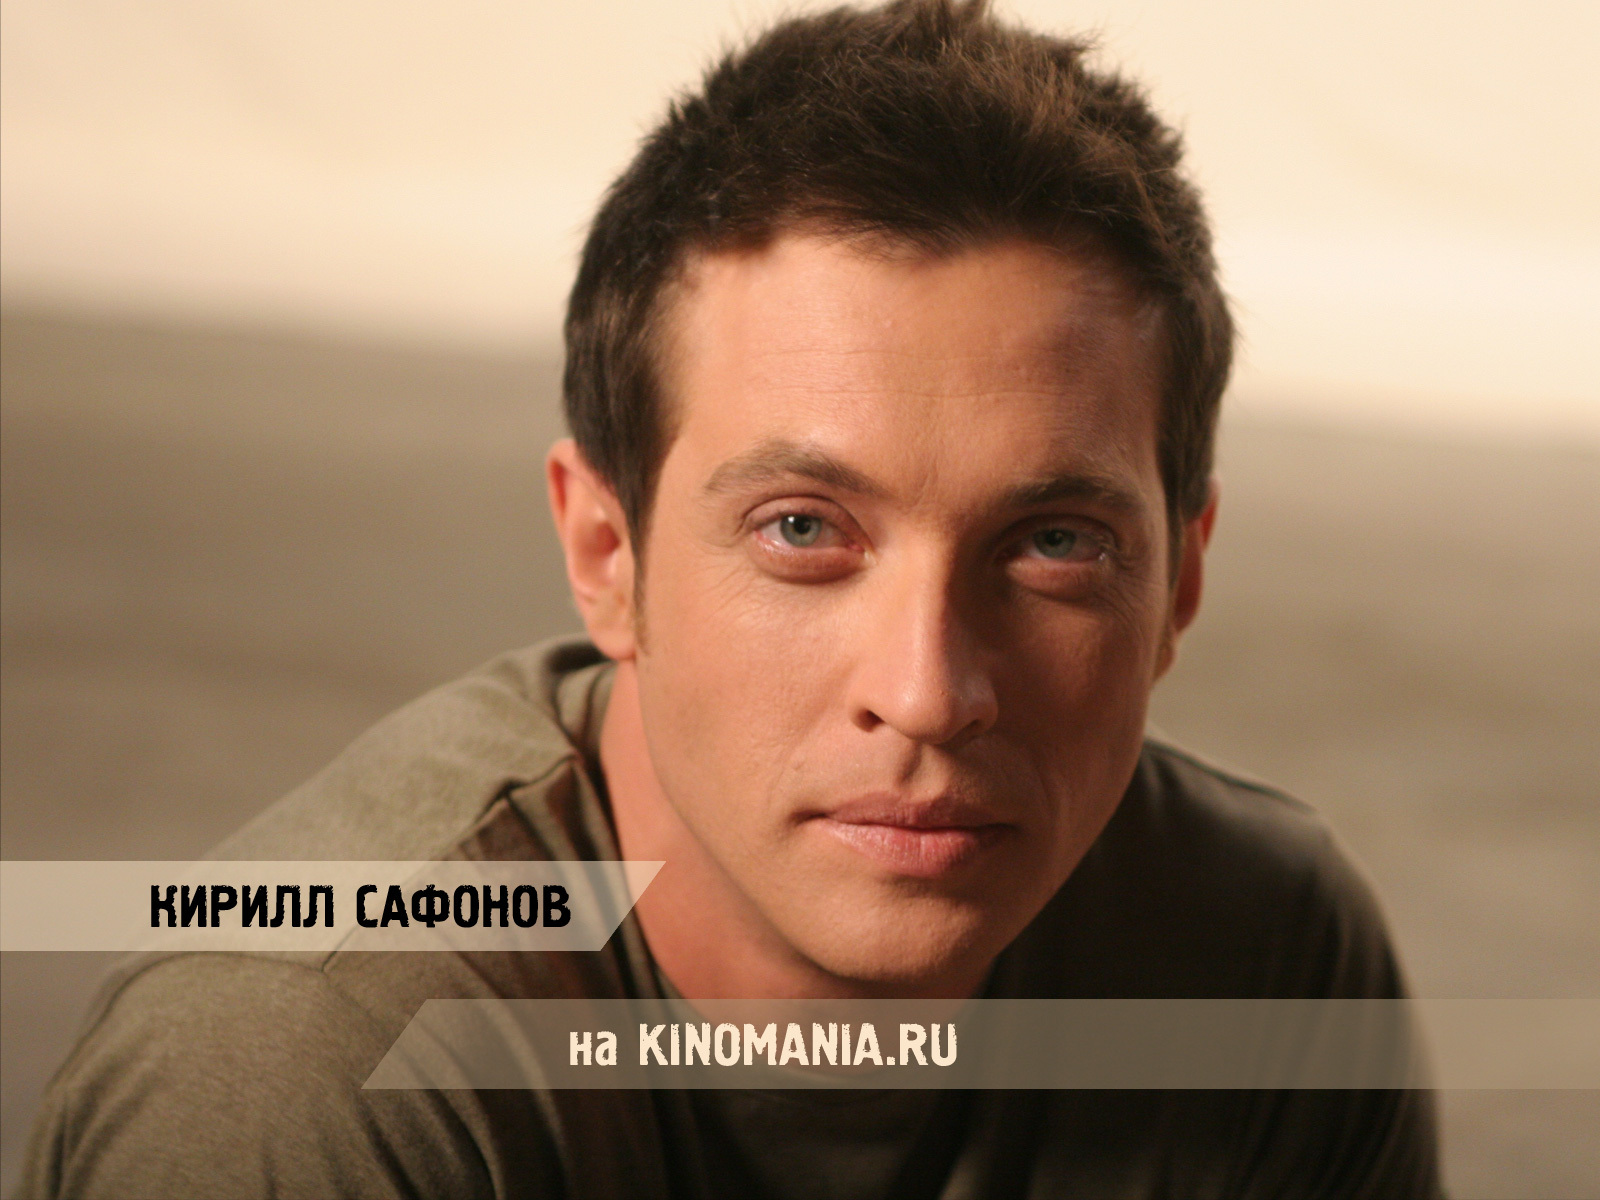 Famous russian Movie Actor Kirill Safonov wallpapers and images 